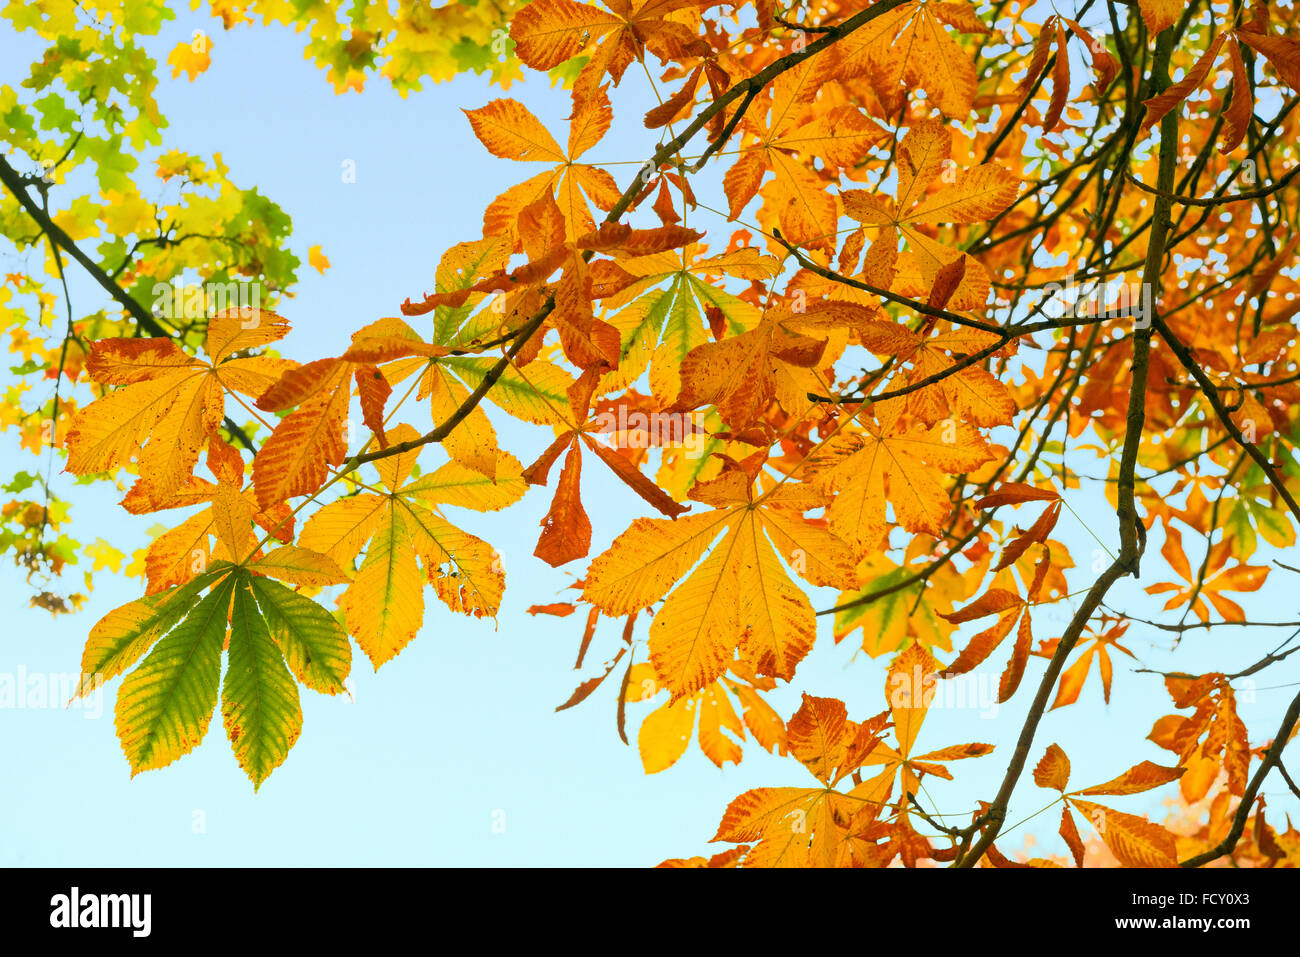 Hanging branches of golden autumn leaves contrasted against the blue sky, horse chestnut and Norway Maple Stock Photo